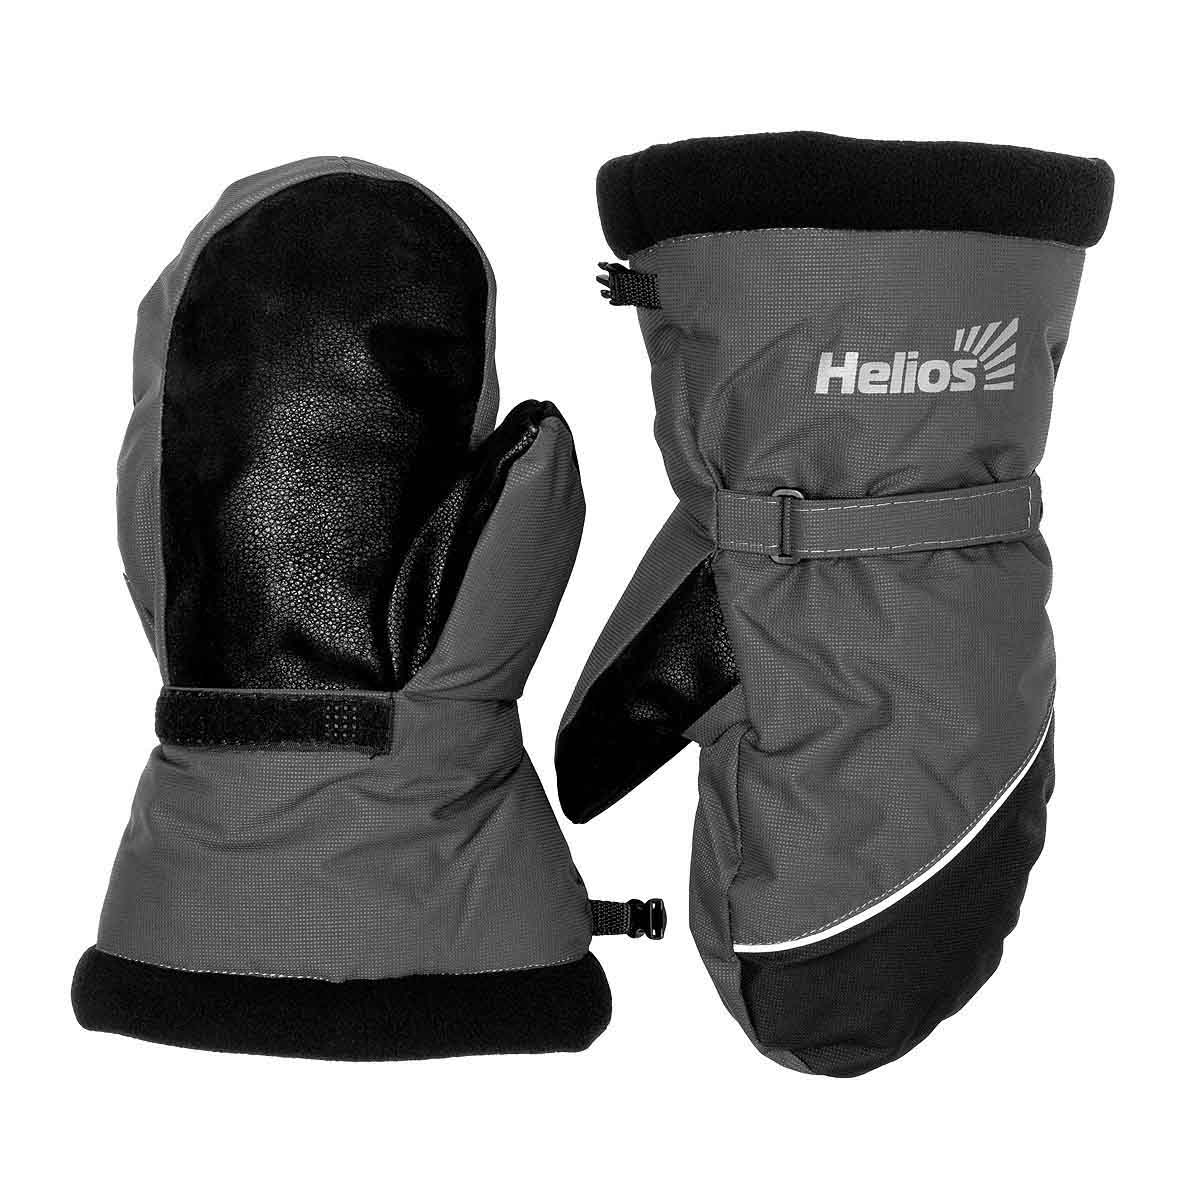 Nord Fleece Mitts Winter Sports Mittens for Men